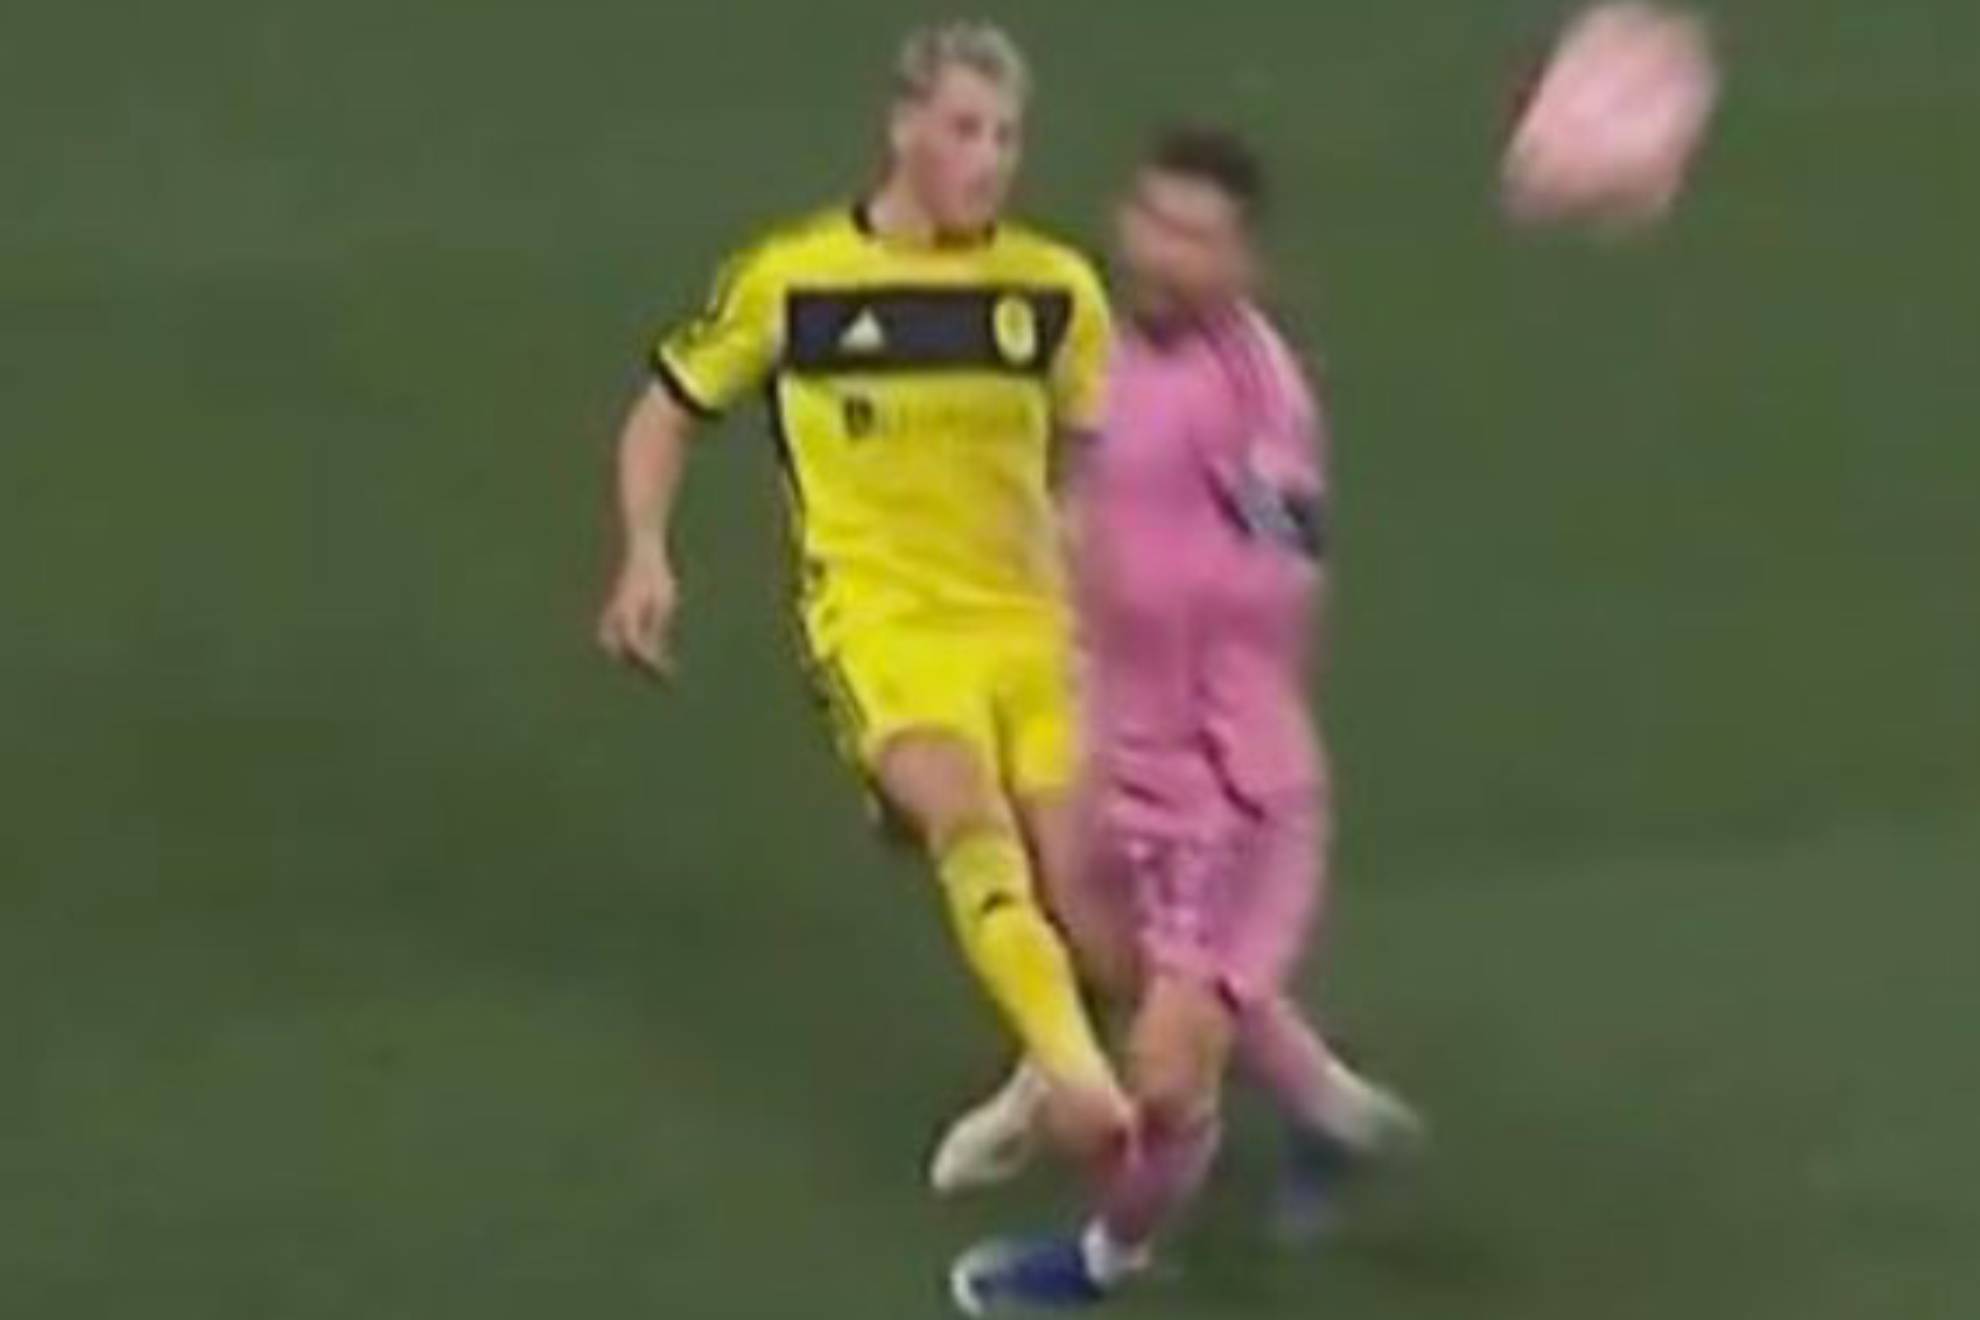 Messis harsh red card kick could have cost Leo dearly: MacNaughton didnt even see a yellow card